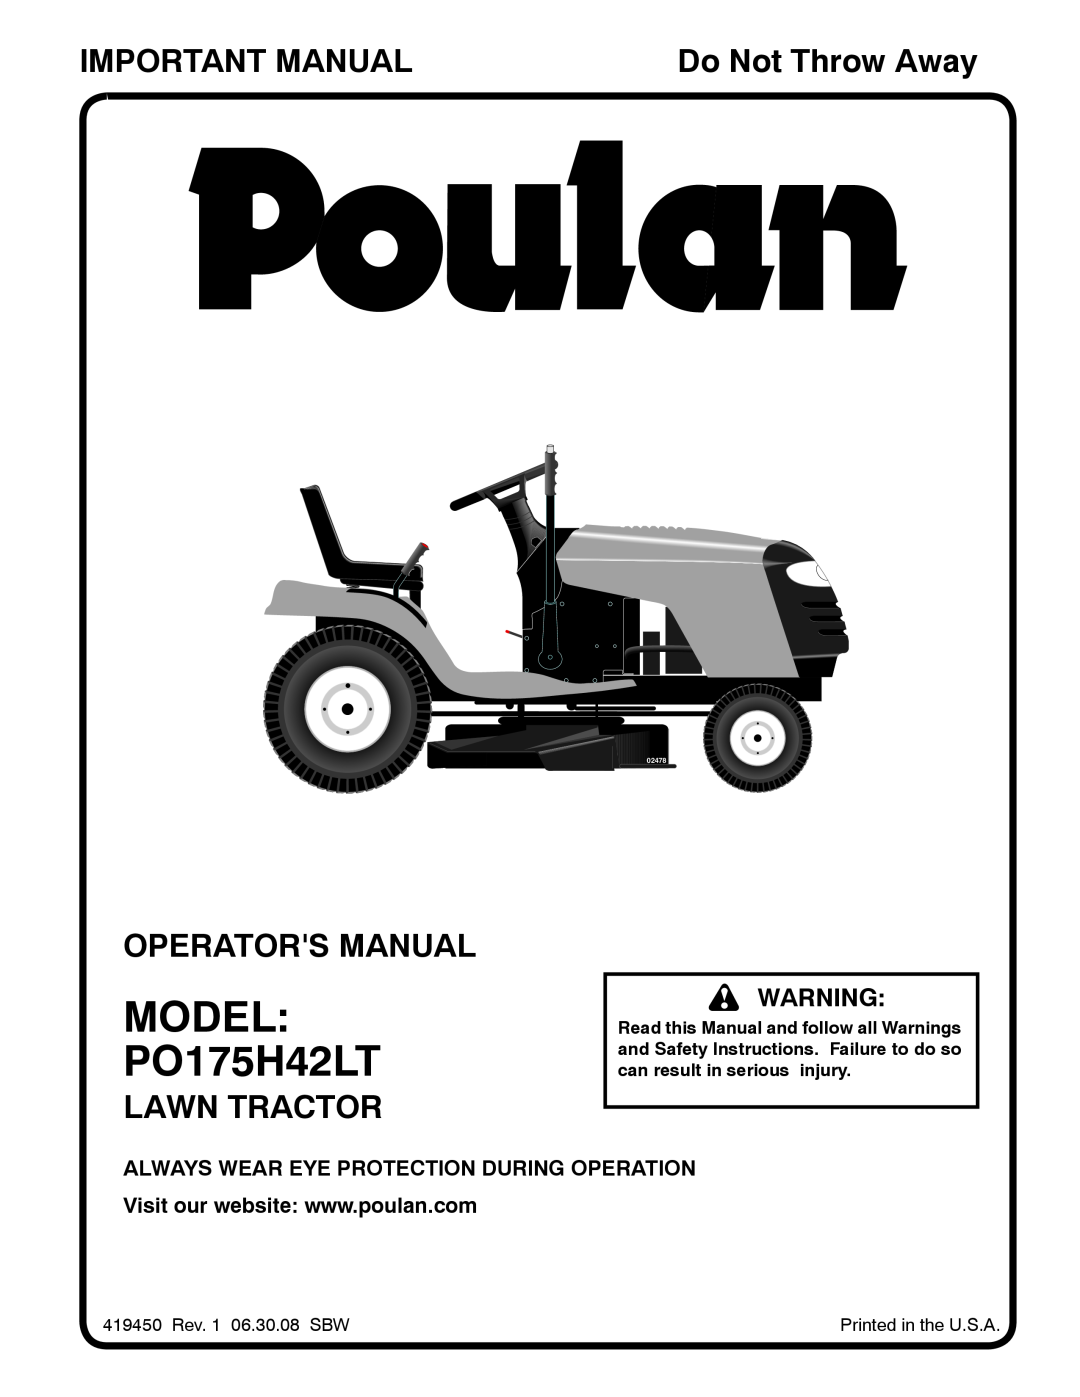 Poulan 96012008600 manual MODEL PO175H42LT, Important Manual, Operators Manual, Lawn Tractor, Do Not Throw Away, 02478 